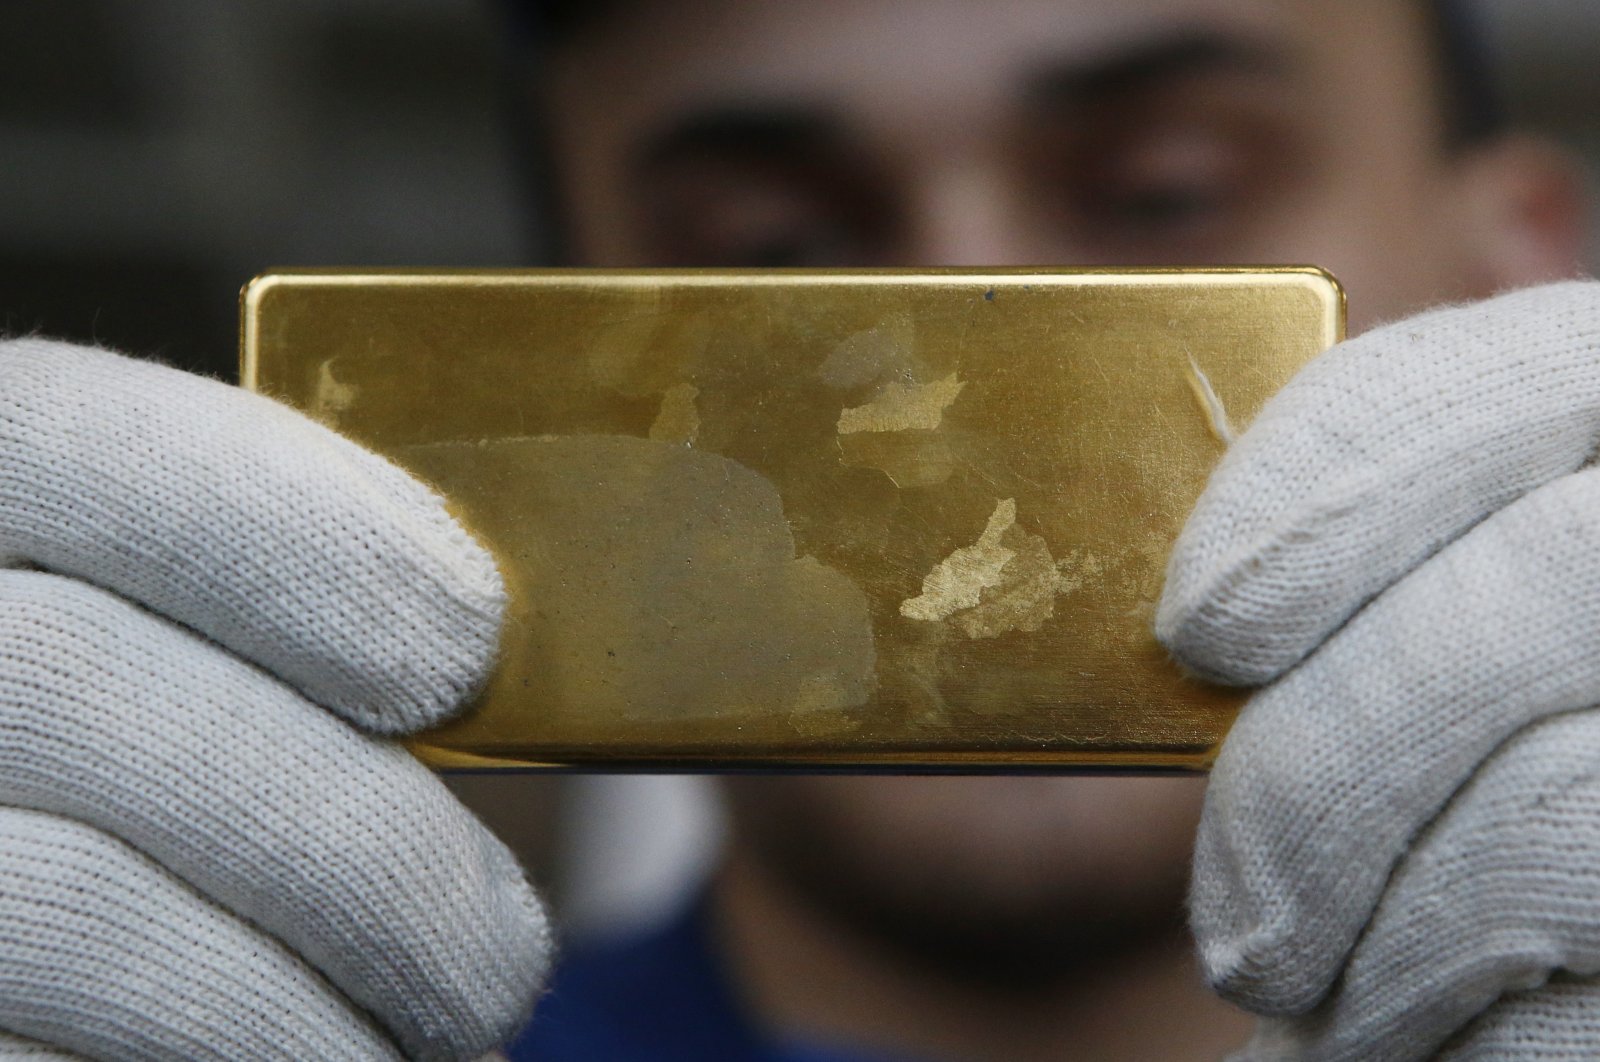 An employee shows a gold bar at the Prioksky Non-Ferrous Metals Plant in Kasimov, Russia, Feb. 14, 2017. (Reuters Photo)